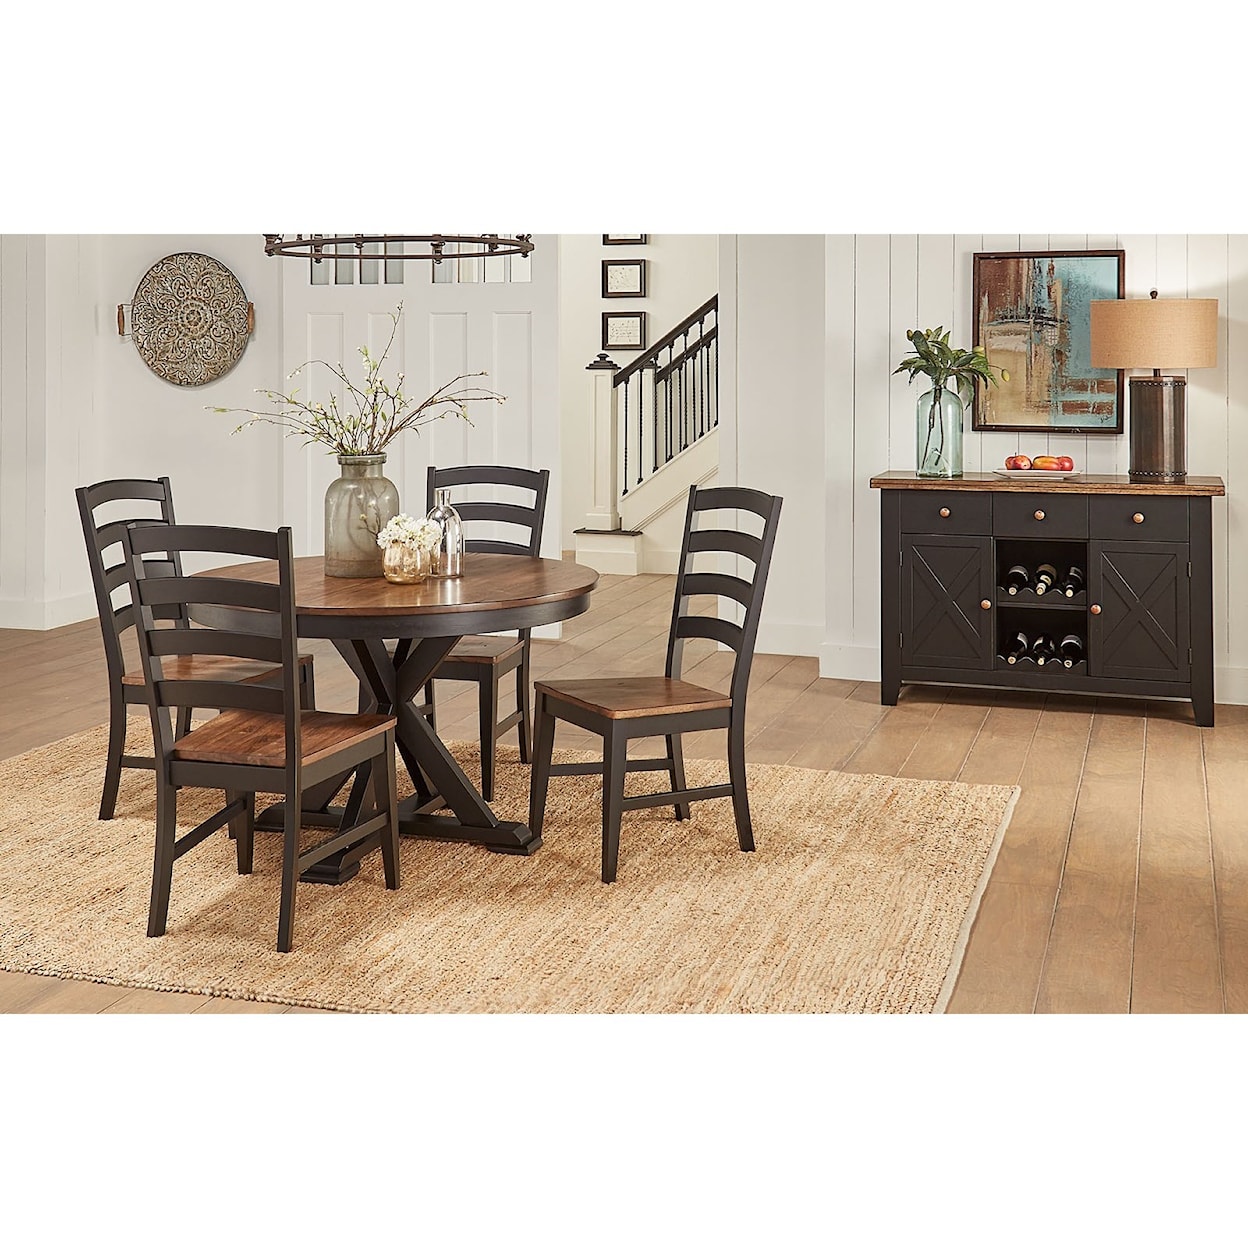 AAmerica Stormy Ridge Oval Dining Table